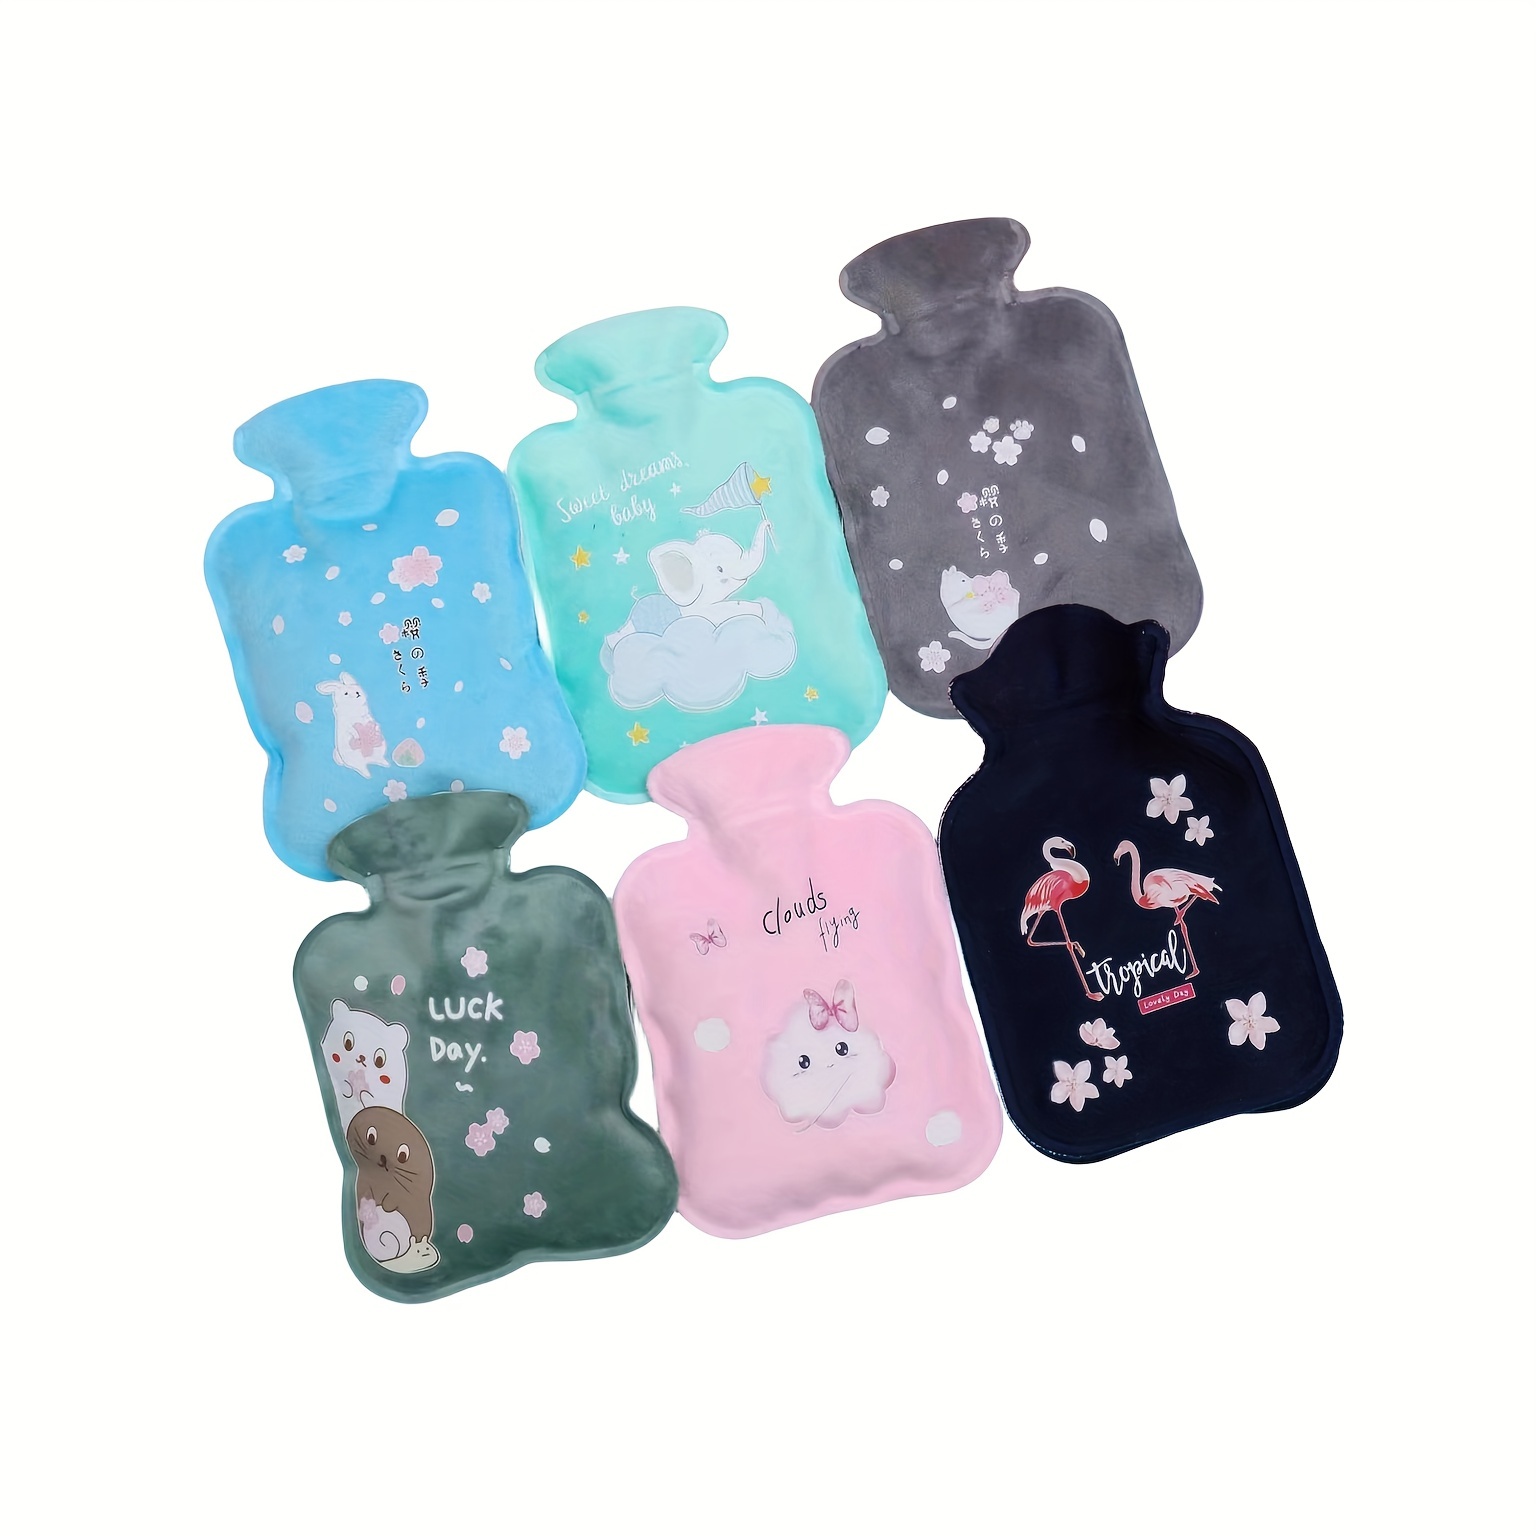 Hot Water Bag Hand Warmer For Kids Warm Water Bottle For Bed Hurt Relief Hot  Water Bag With Cute Dinosaur Design Soft Cover - AliExpress